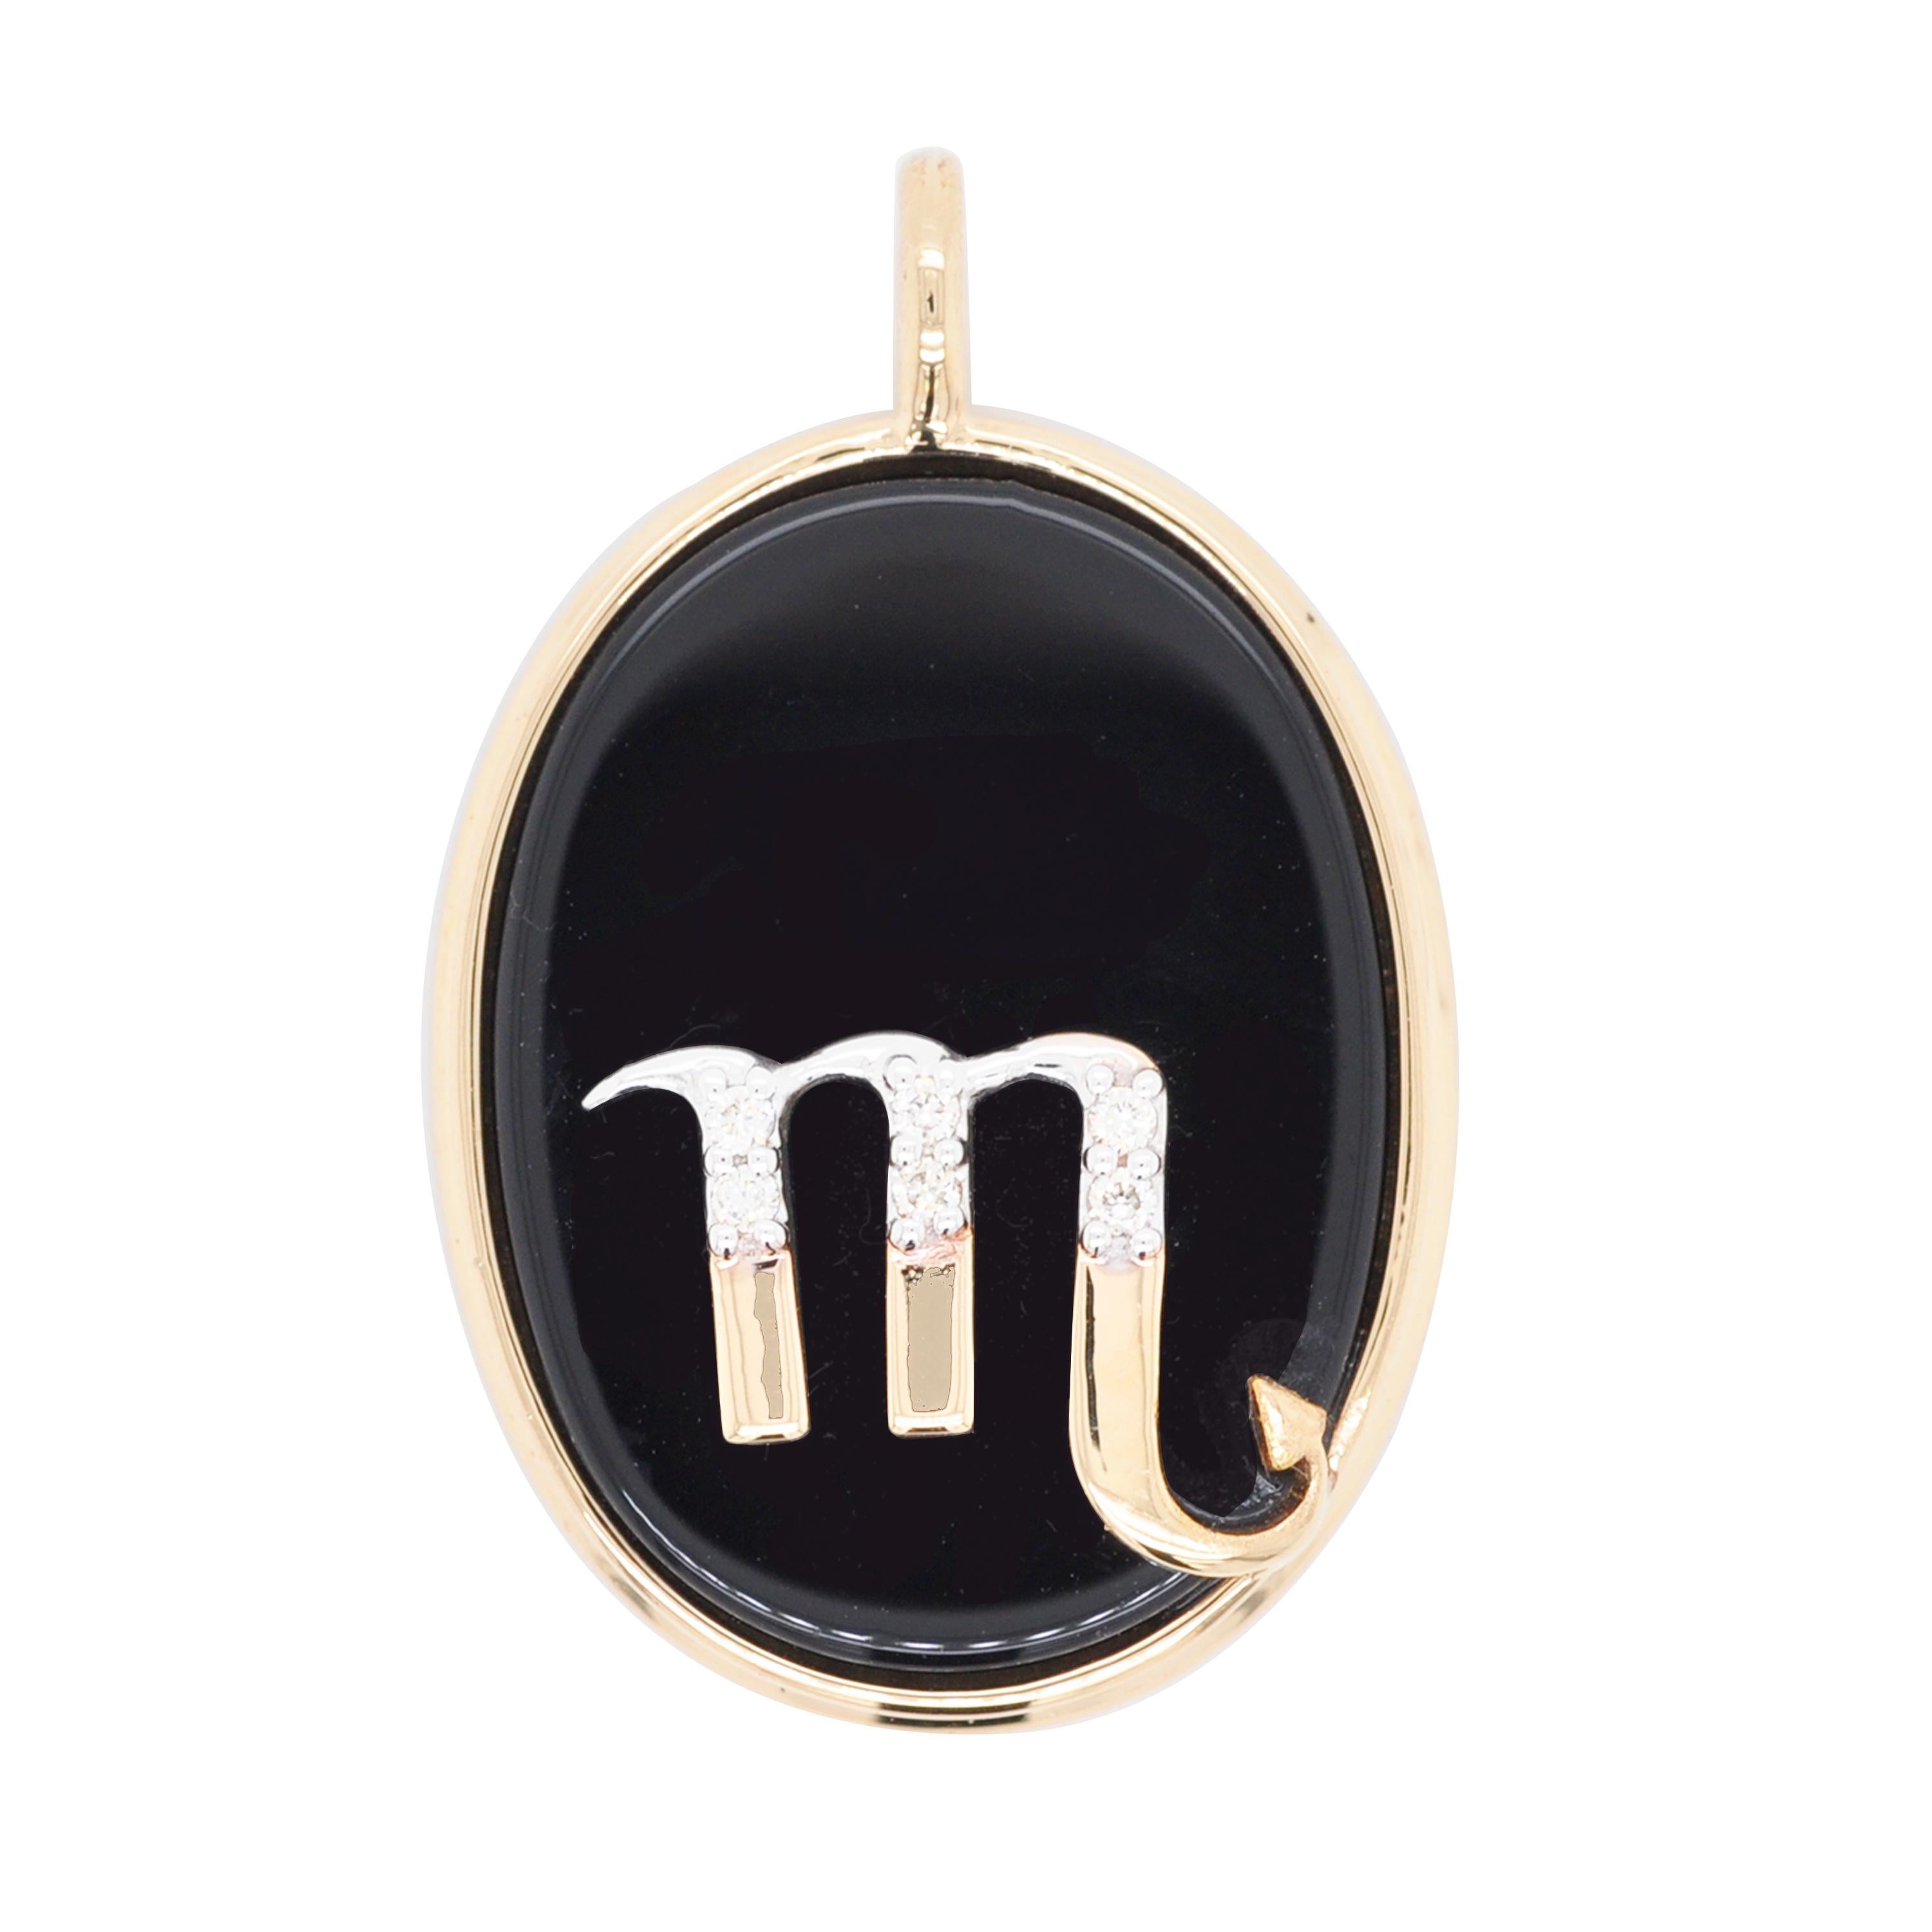 14 Karat Gold Reversible Scorpio Carving Cameo Zodiac Diamond Pendant Necklace In New Condition For Sale In Jaipur, Rajasthan